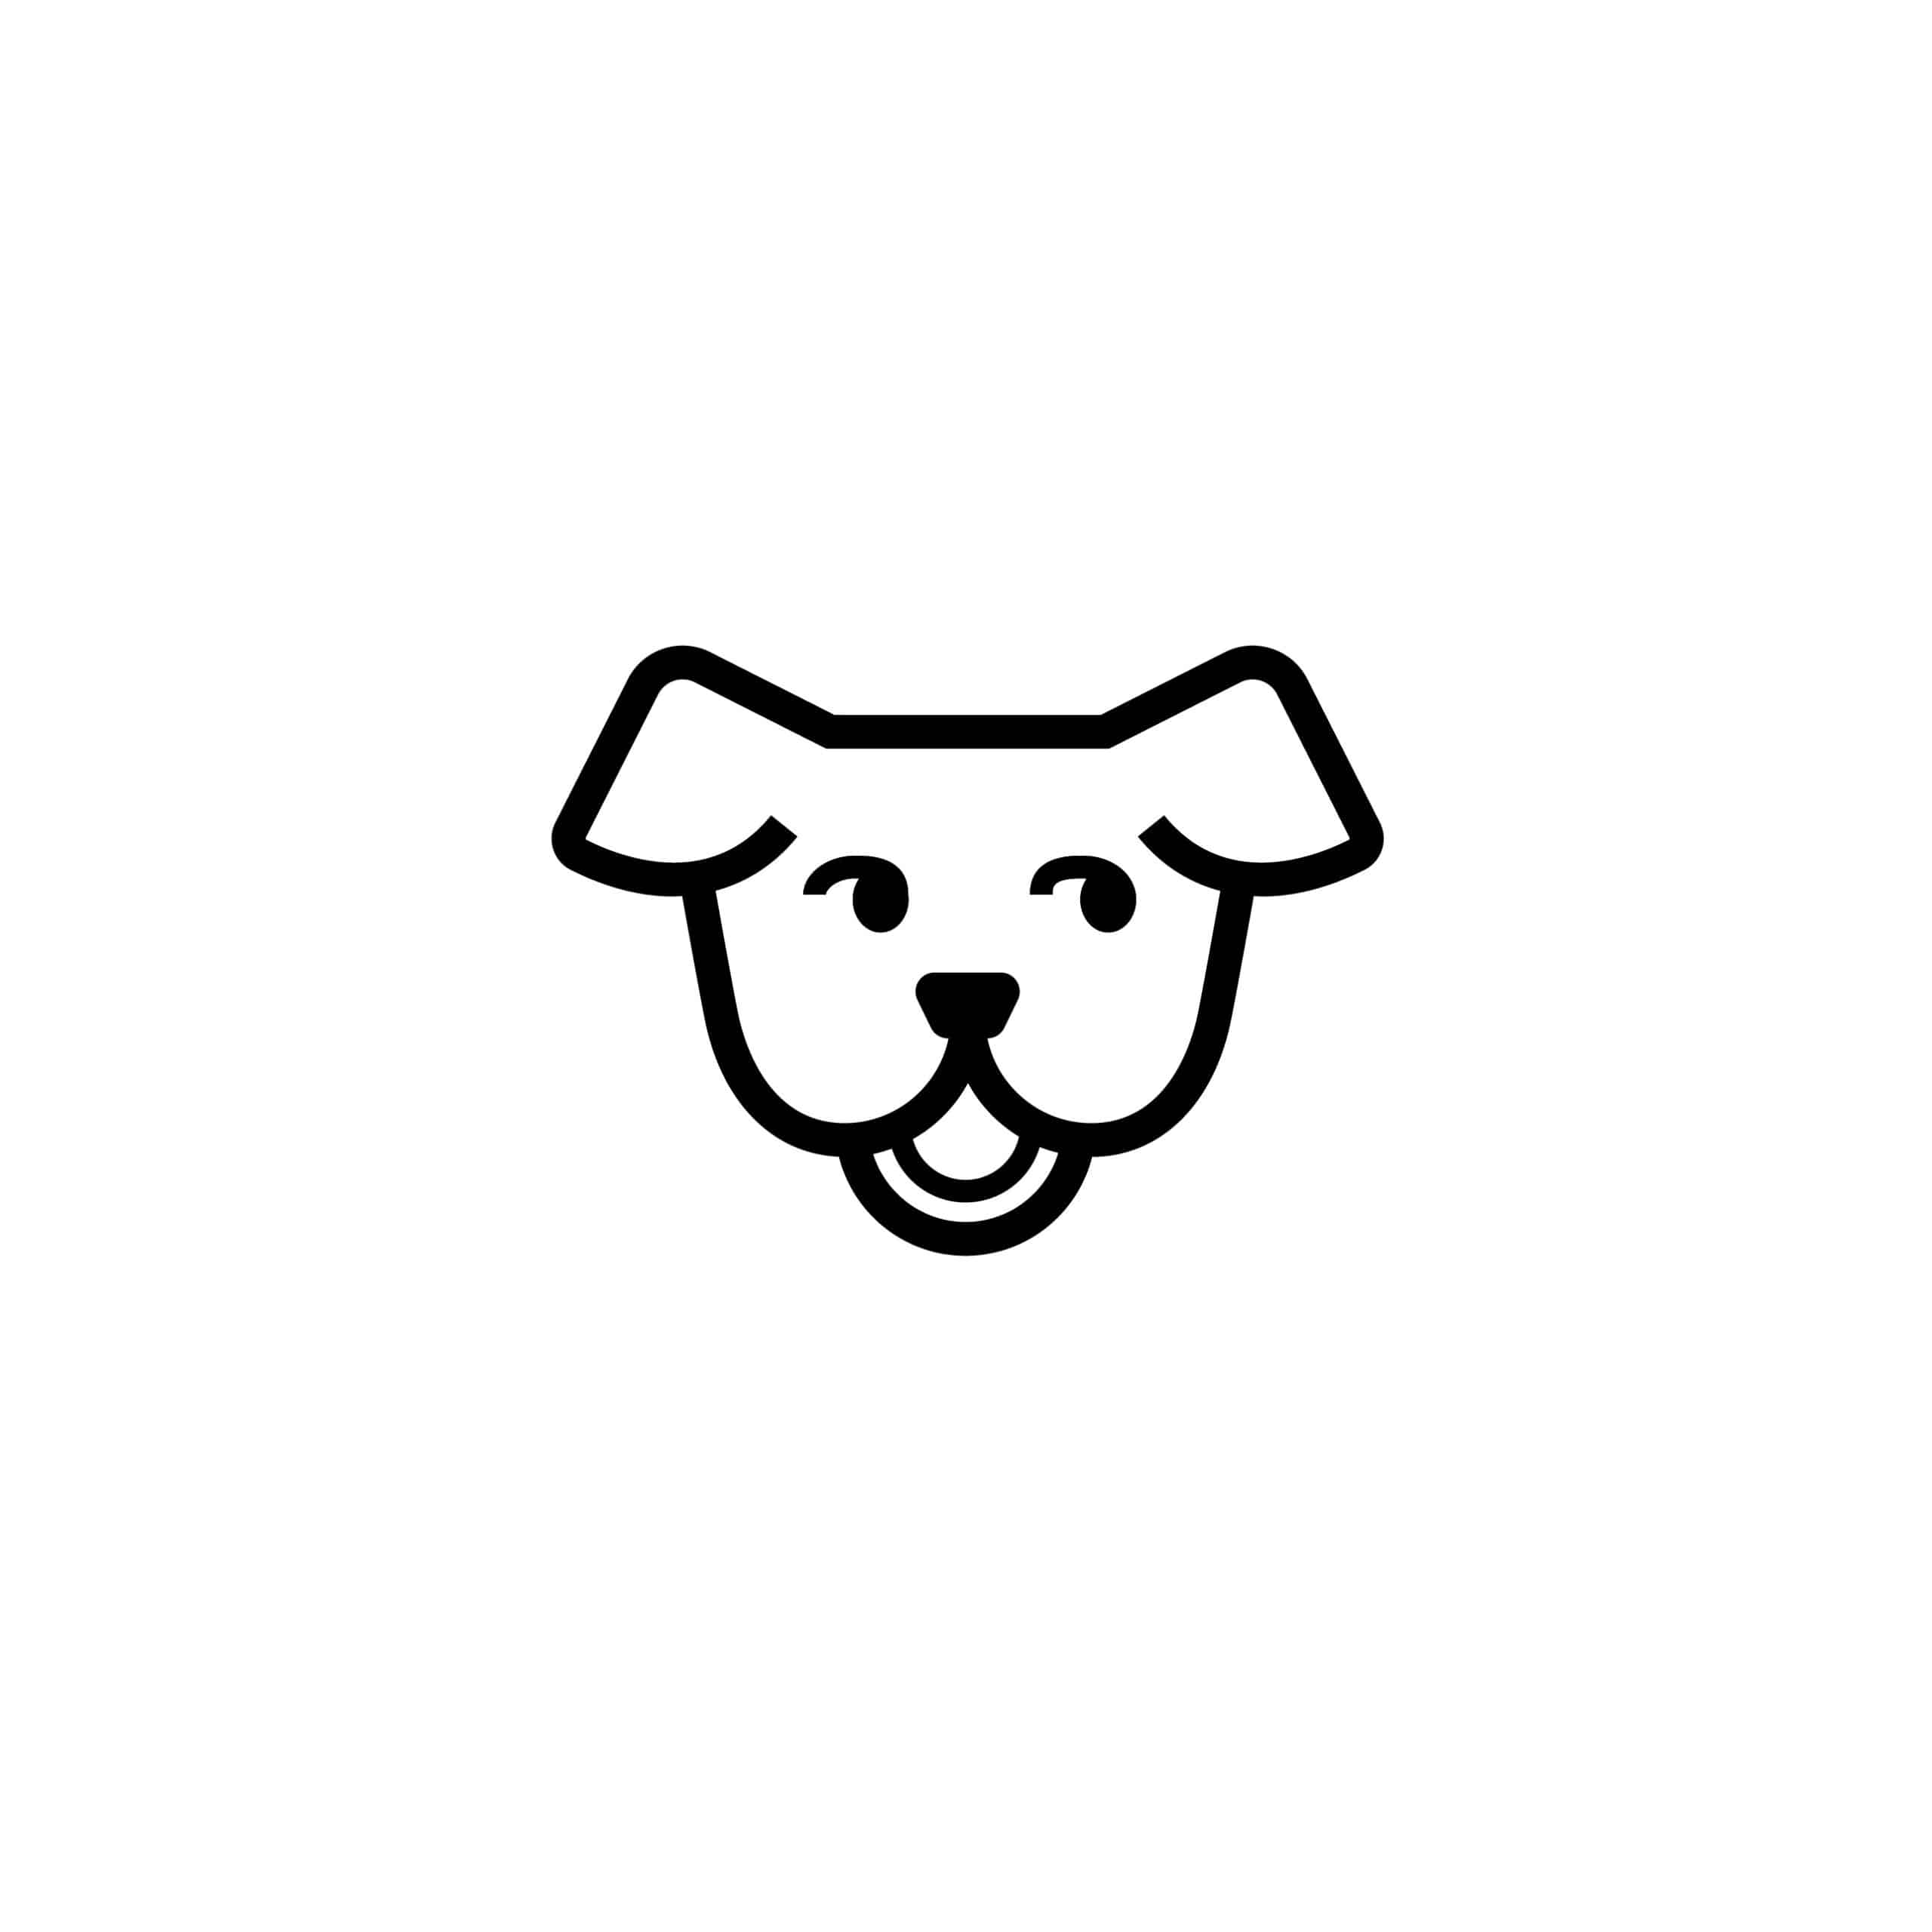 Cute Pit Bull Logo Mark for The Mutt Mobile by Stellen Design Branding Agency in Los Angles CA